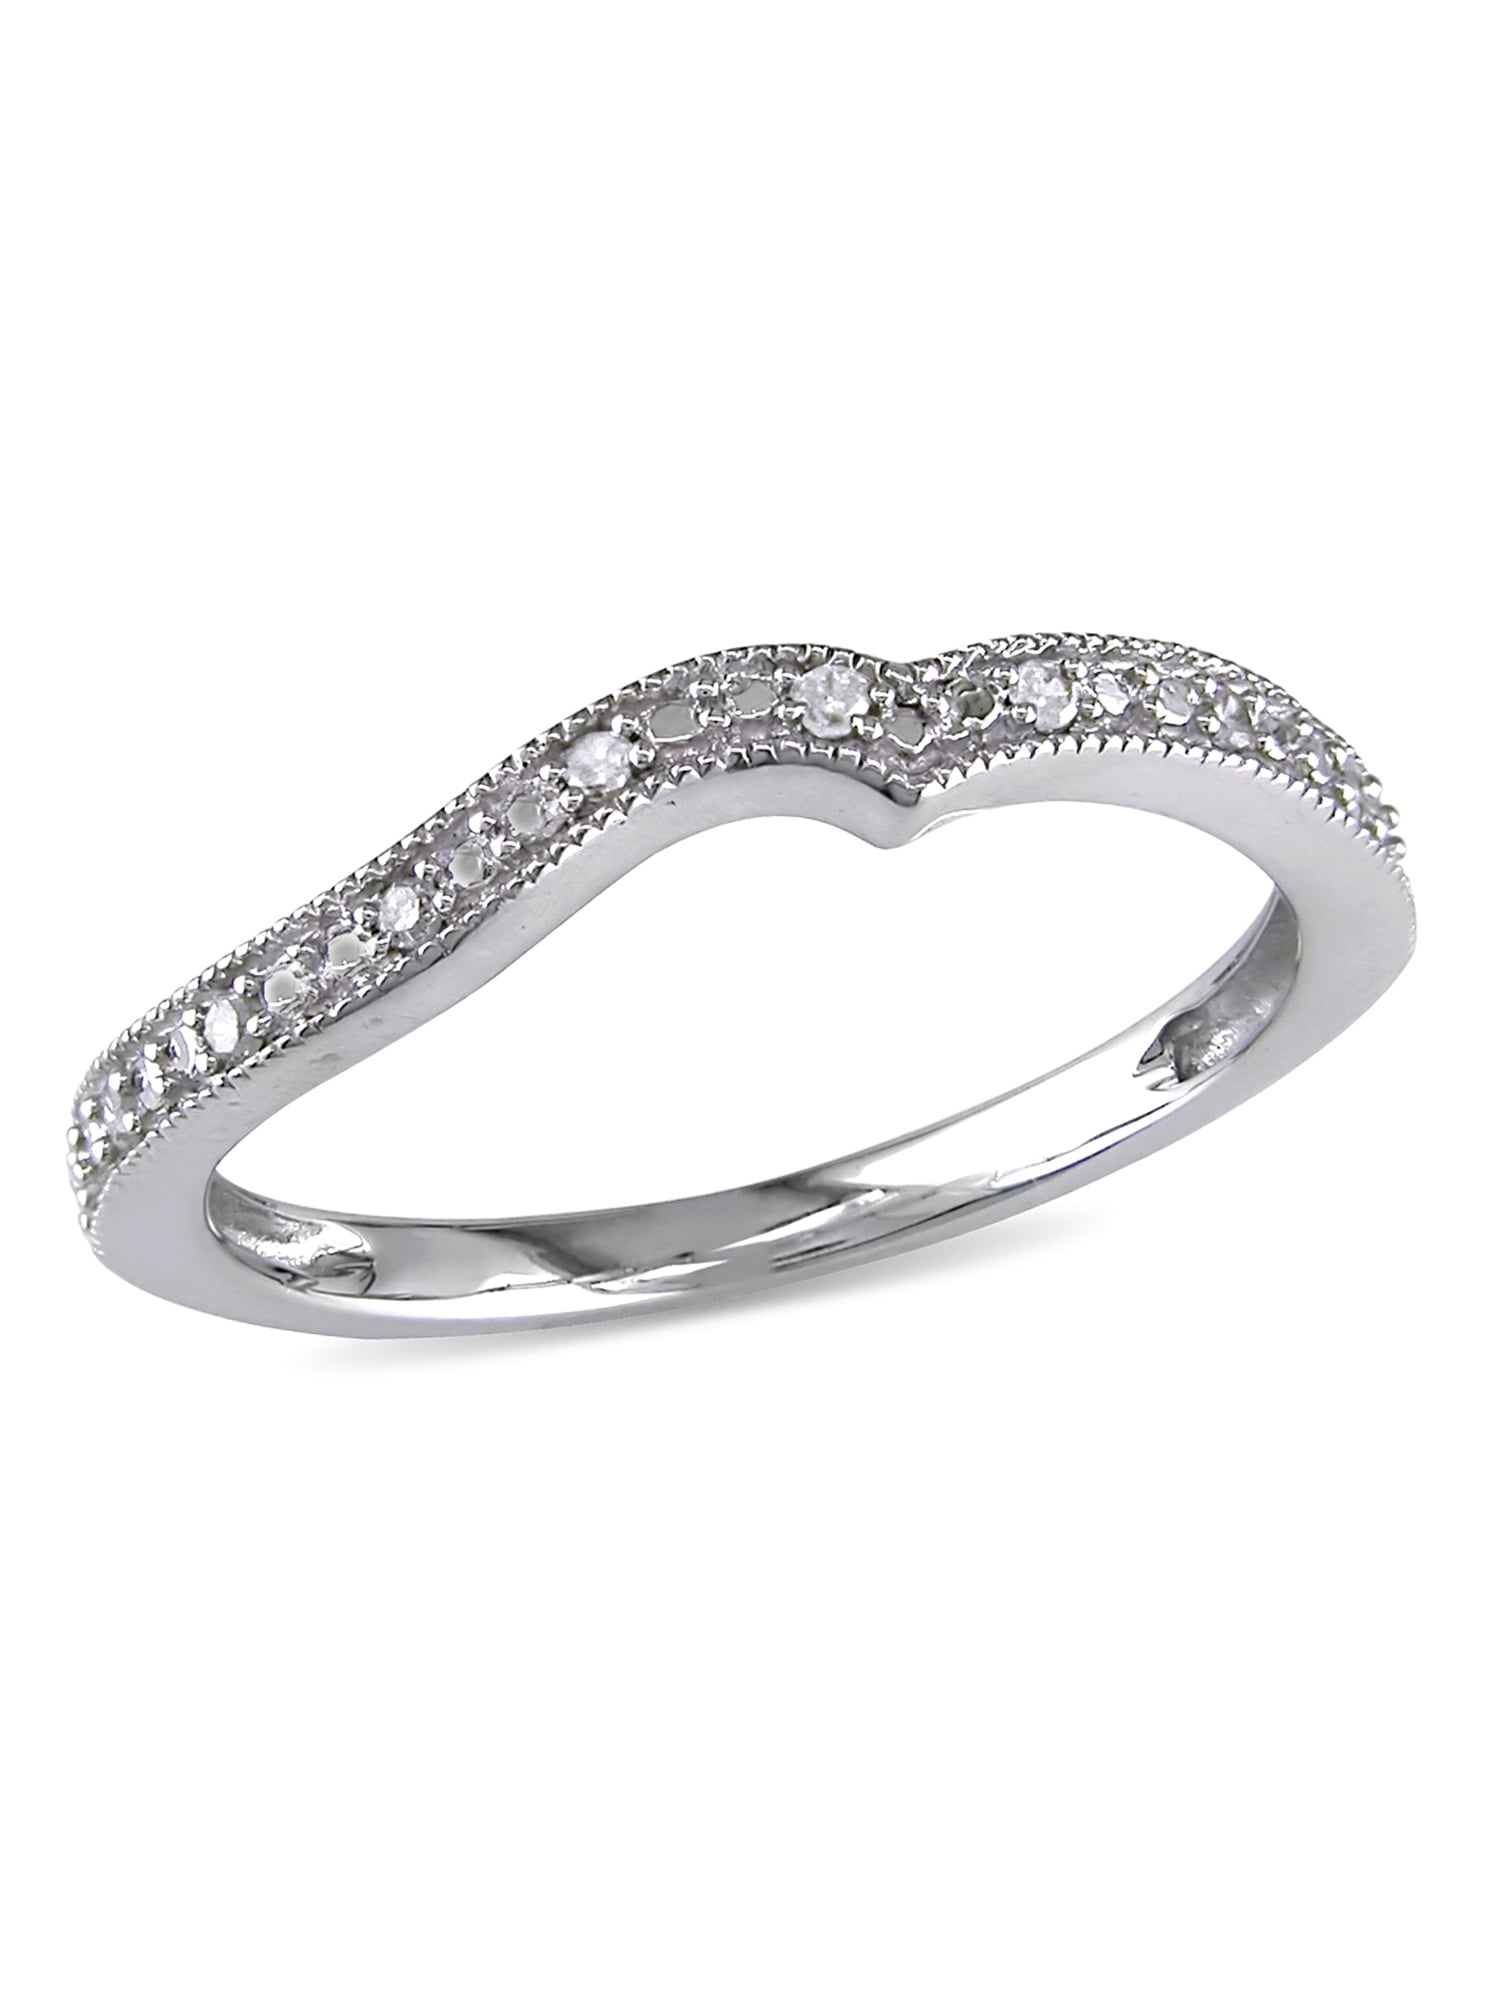 Cali Trove Round White Diamond Accent 10K White Gold Twist Stackable Anniversary Band Ring for Women 